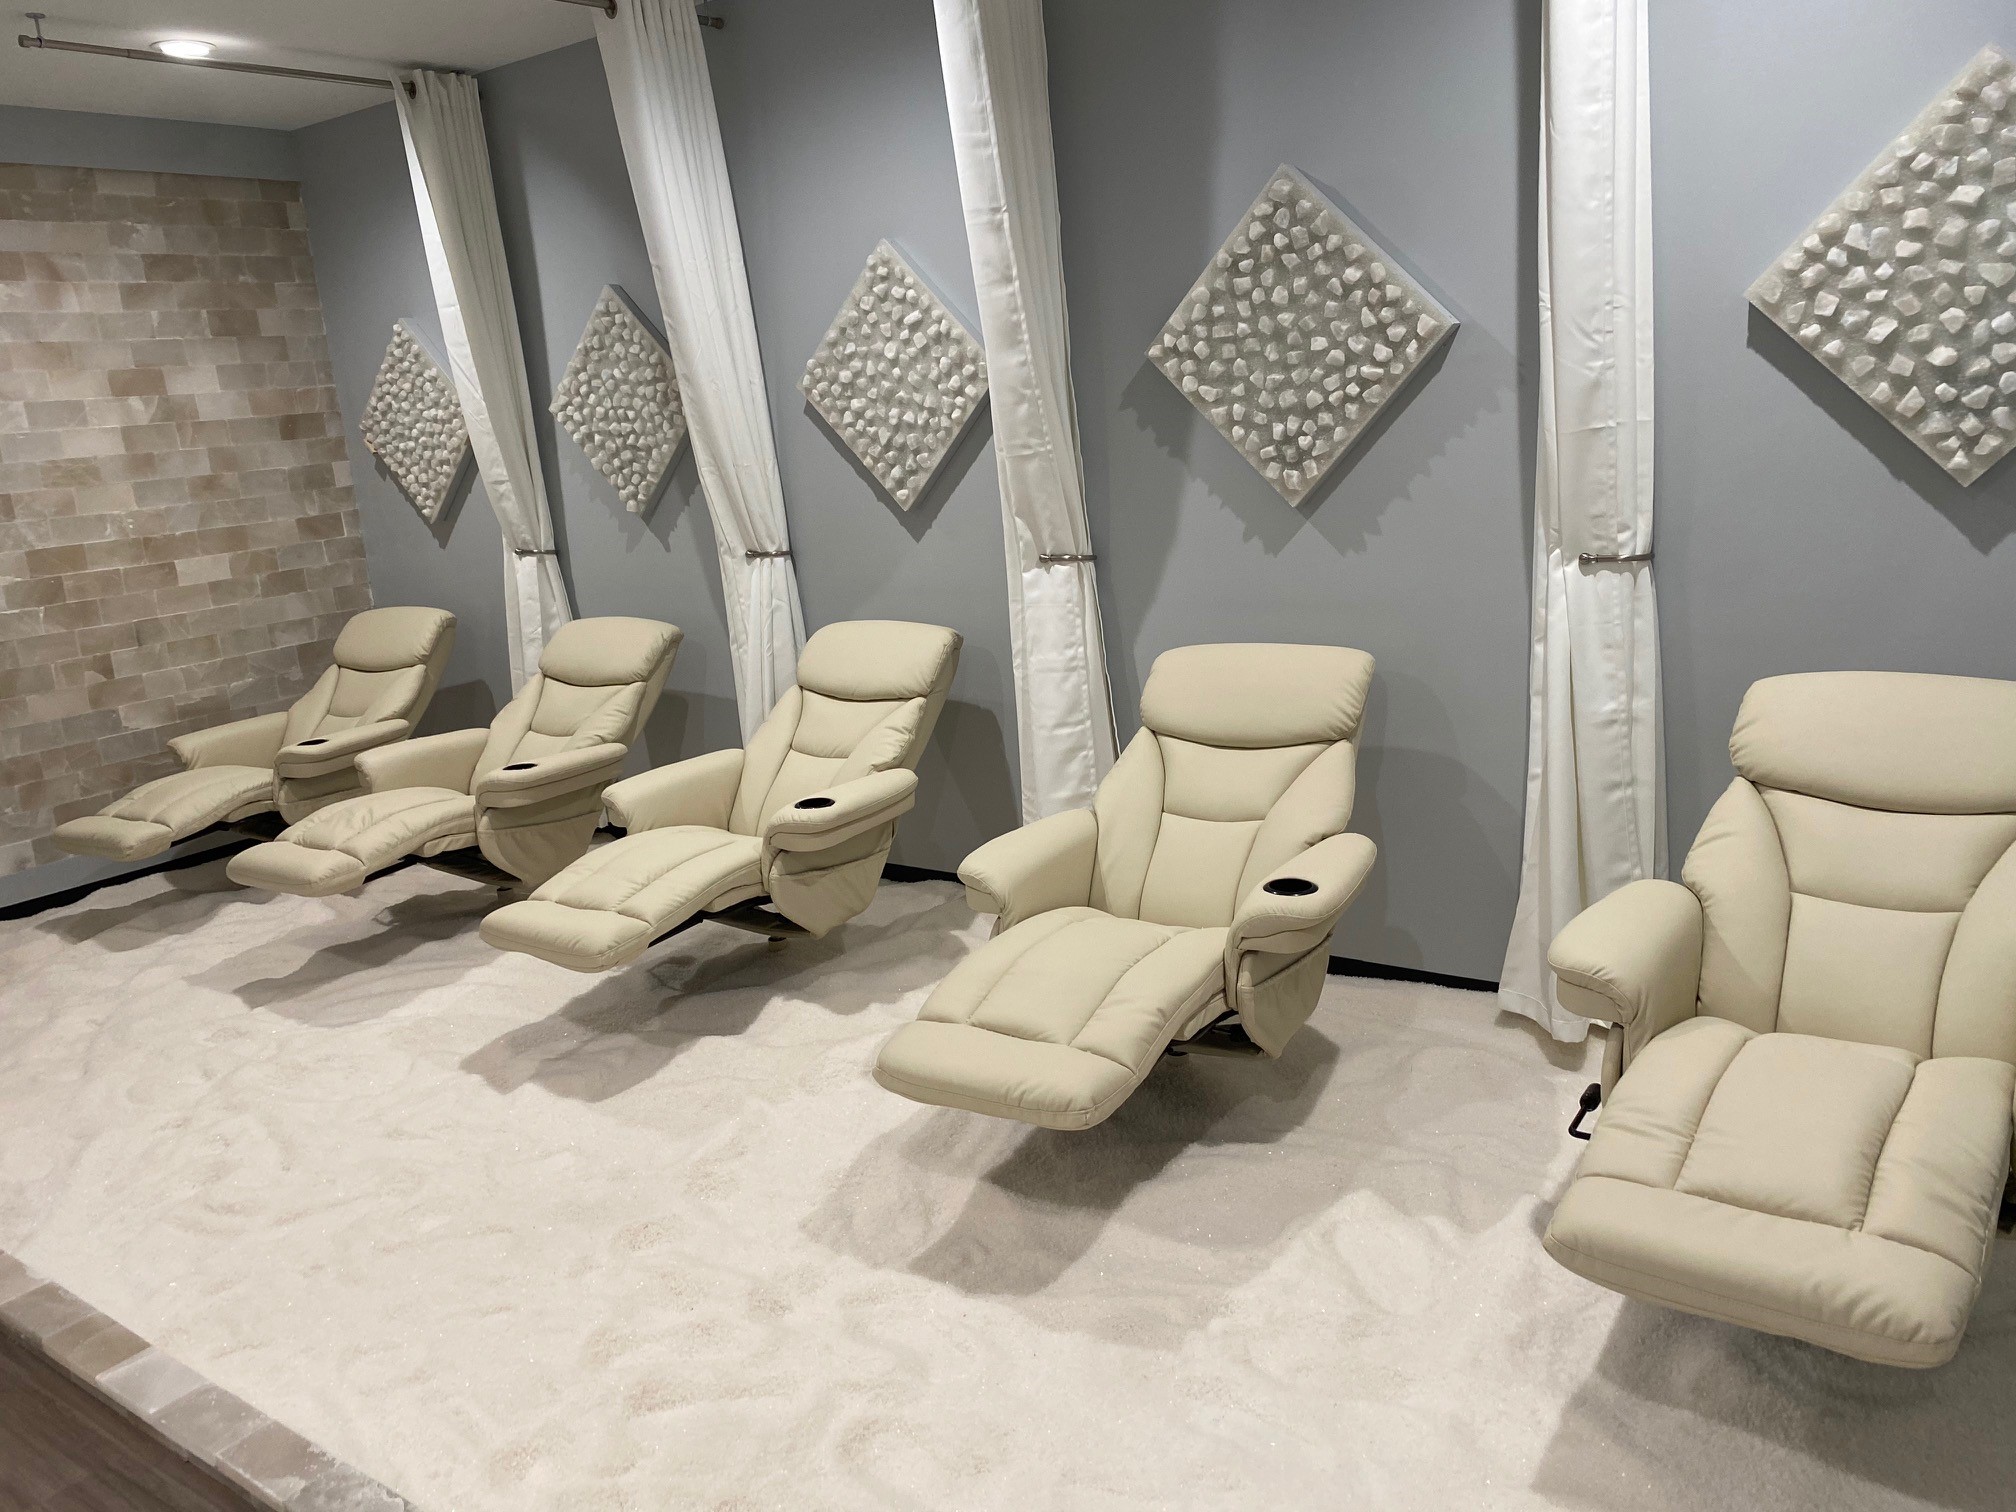 Five white cushioned reclining chairs on a salt-covered floor with a salt stone wall, four white held up separator curtains, and five diamond shaped slat stone decor on the walls.